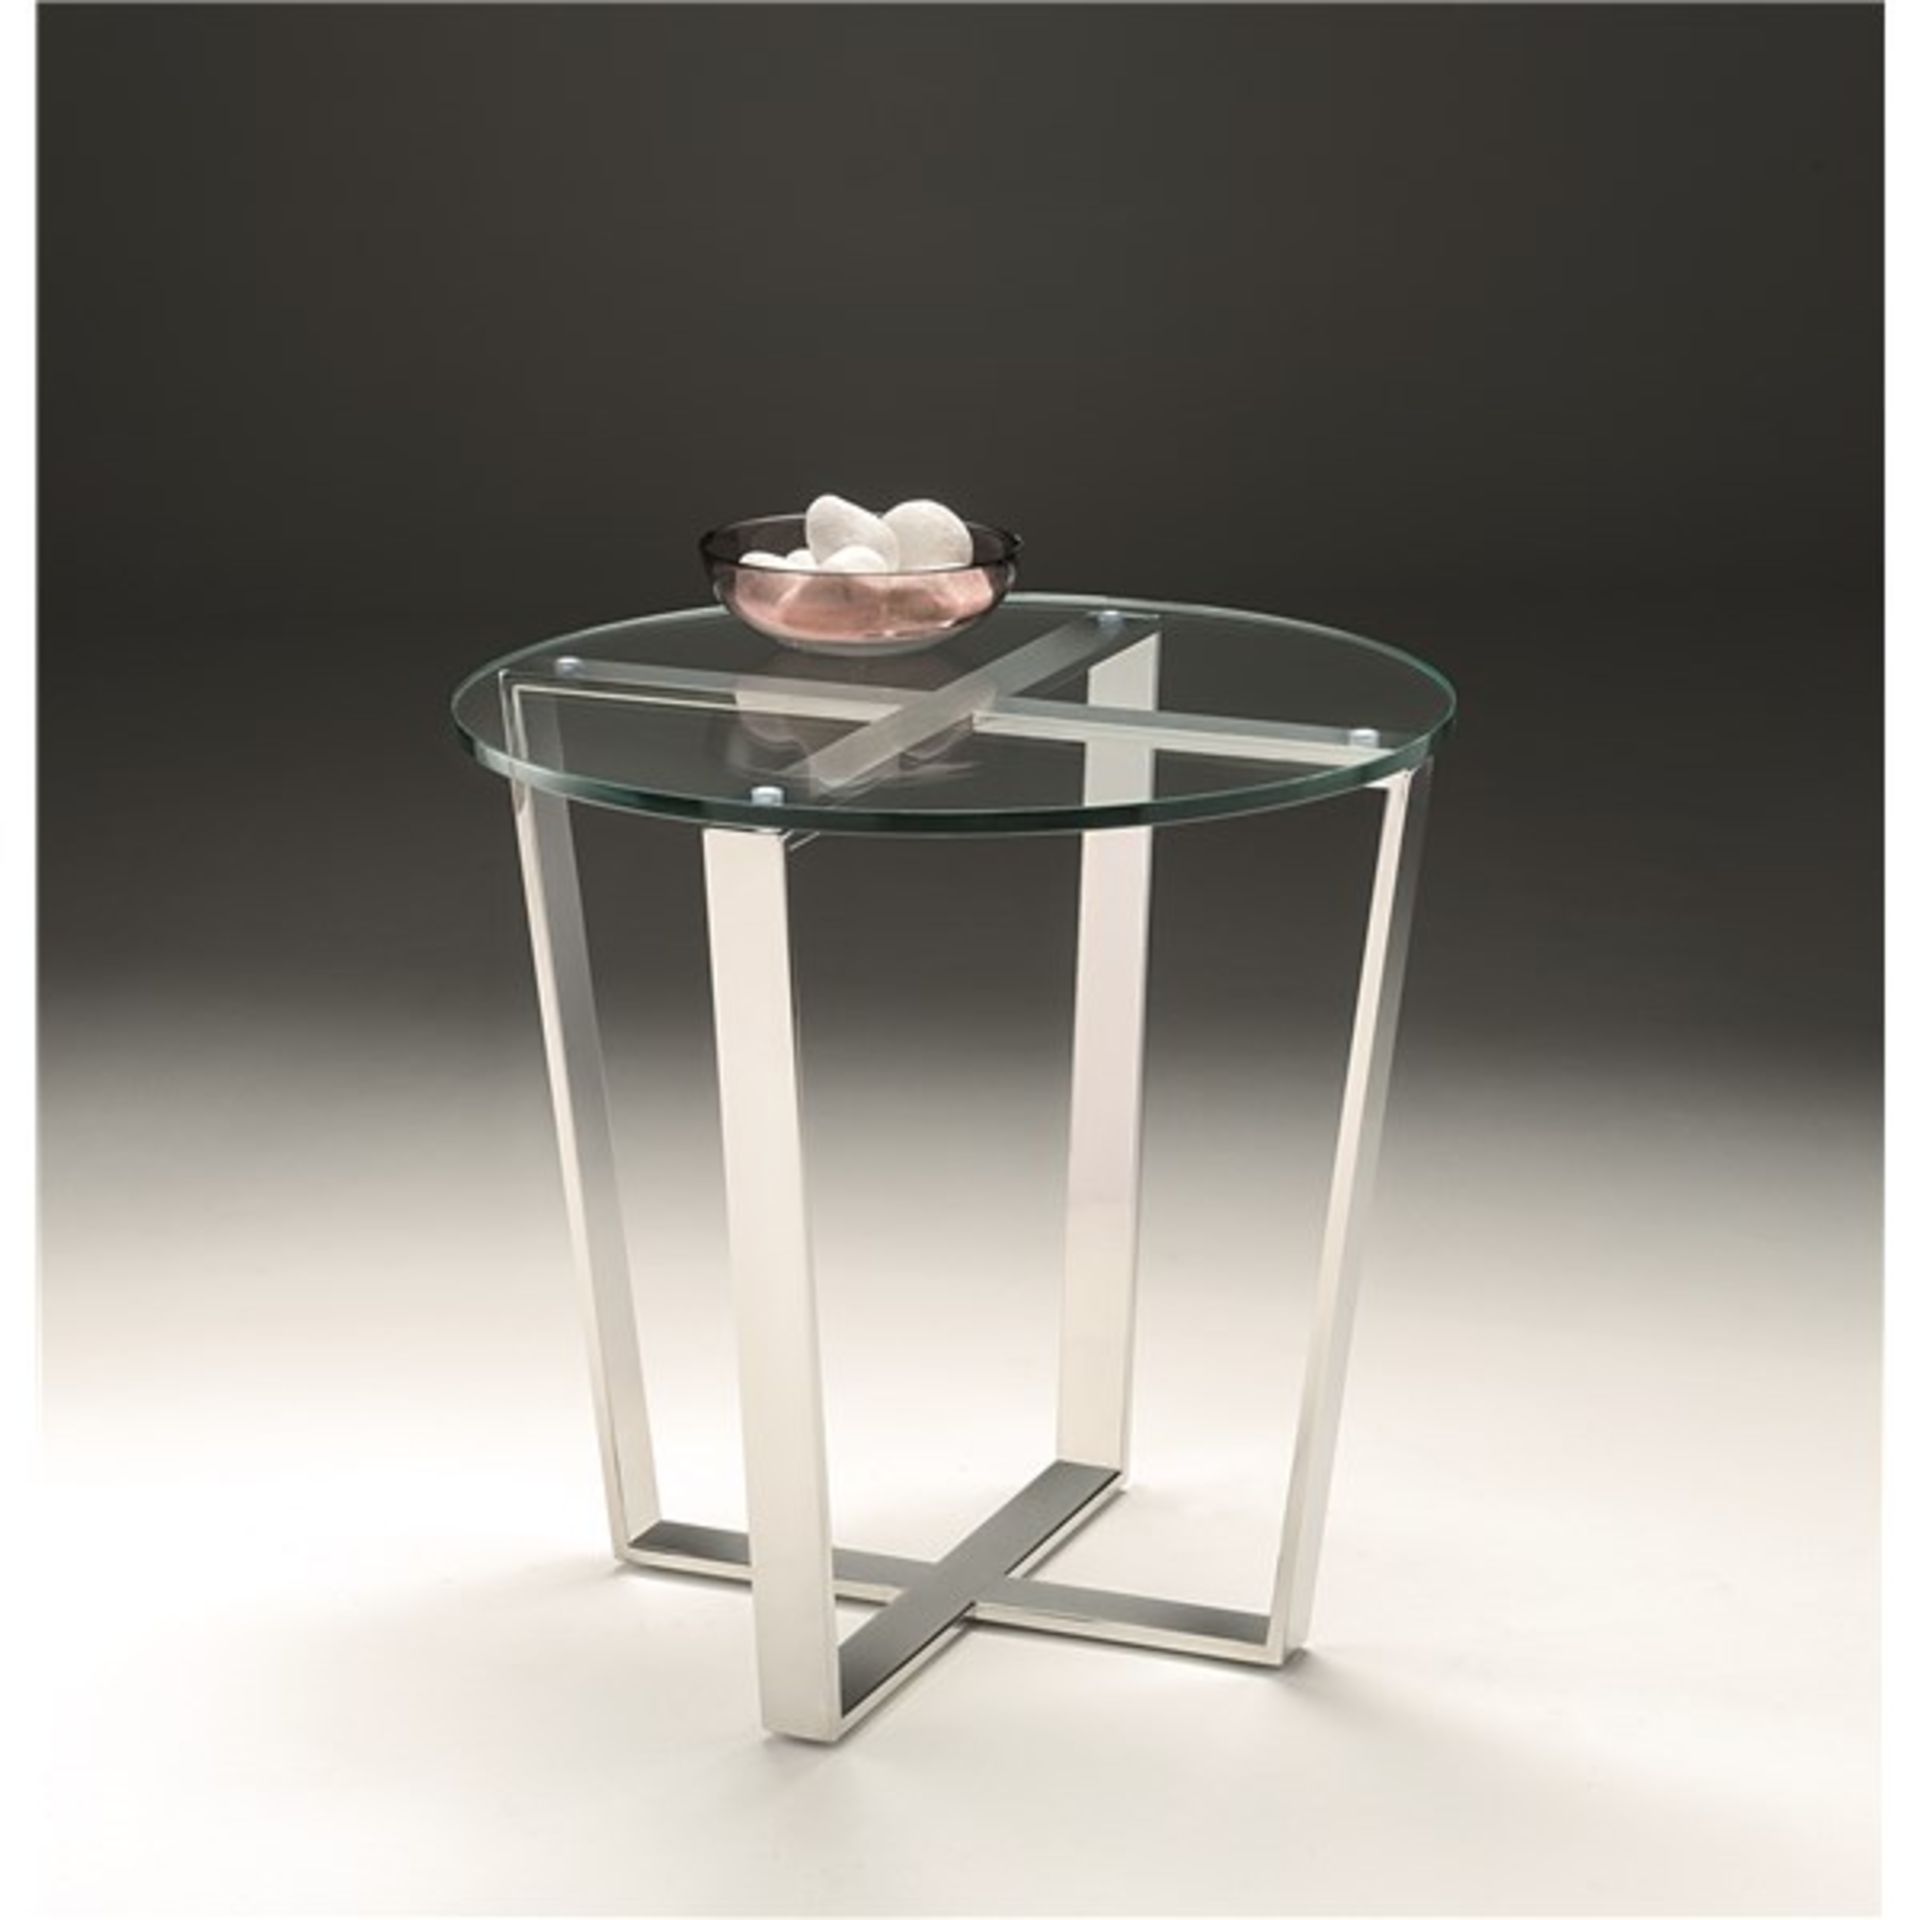 2 x Chelsom ELLIPSE Lamp Tables - Pair of - CL081 - Stainless Steel Base With Clear Tempered Glass - Image 2 of 3